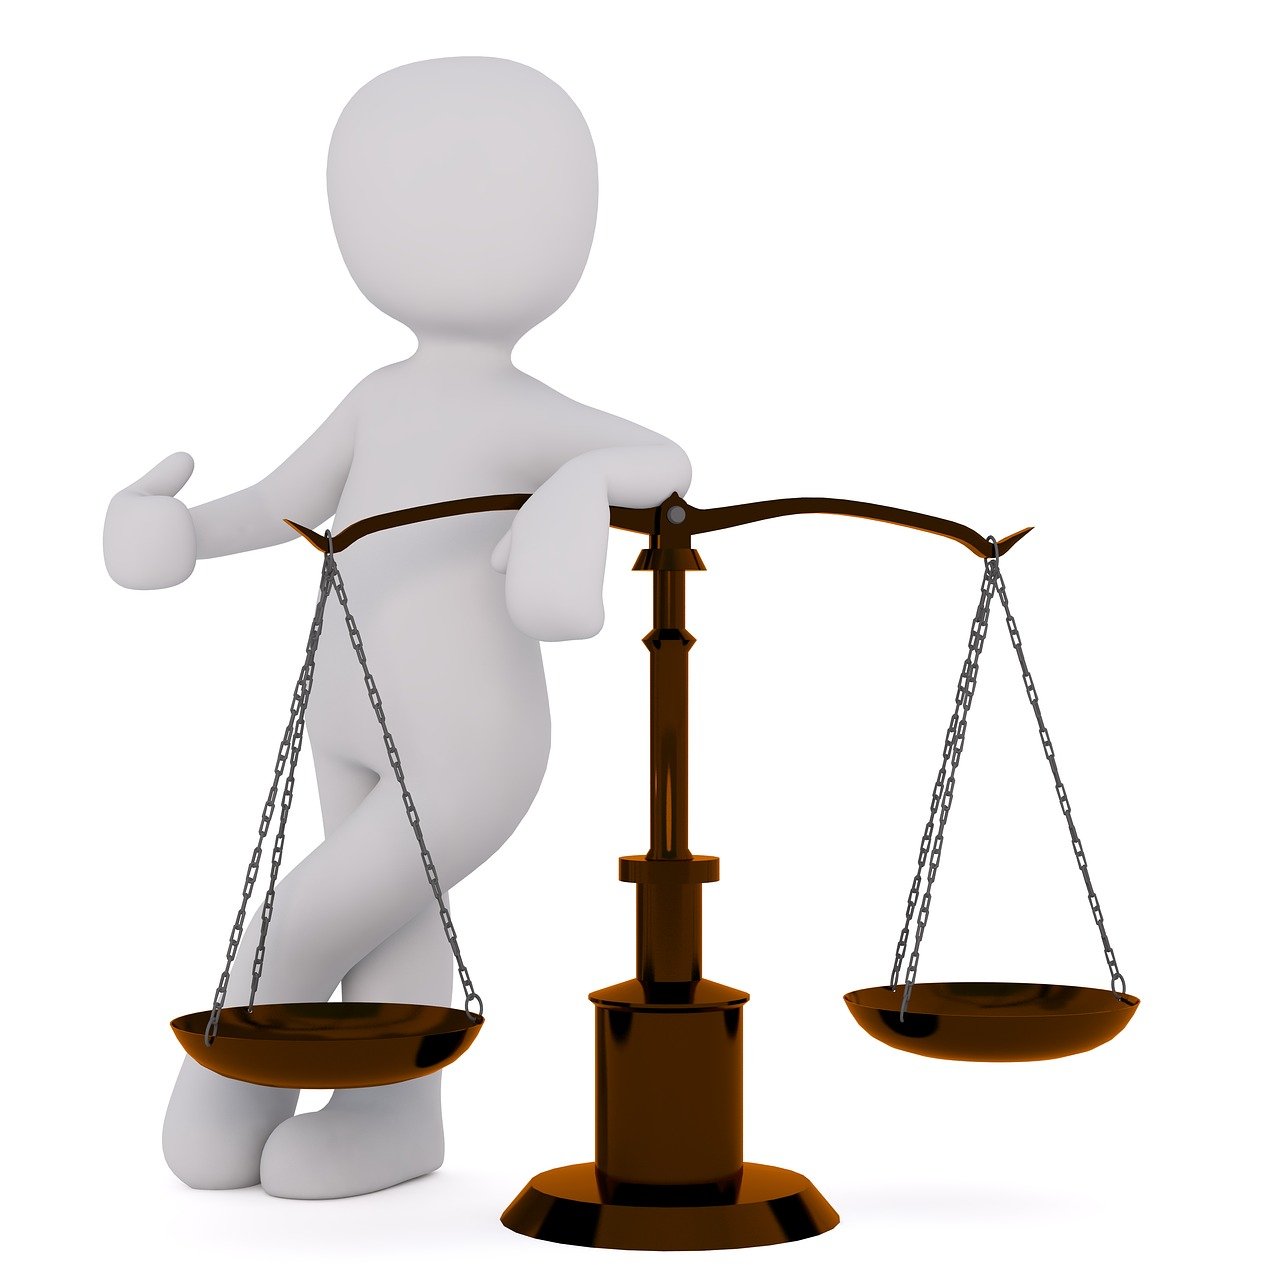 a person standing next to a balance scale, a digital rendering, figuration libre, judge, fully body photo, cute photo, 3 d image